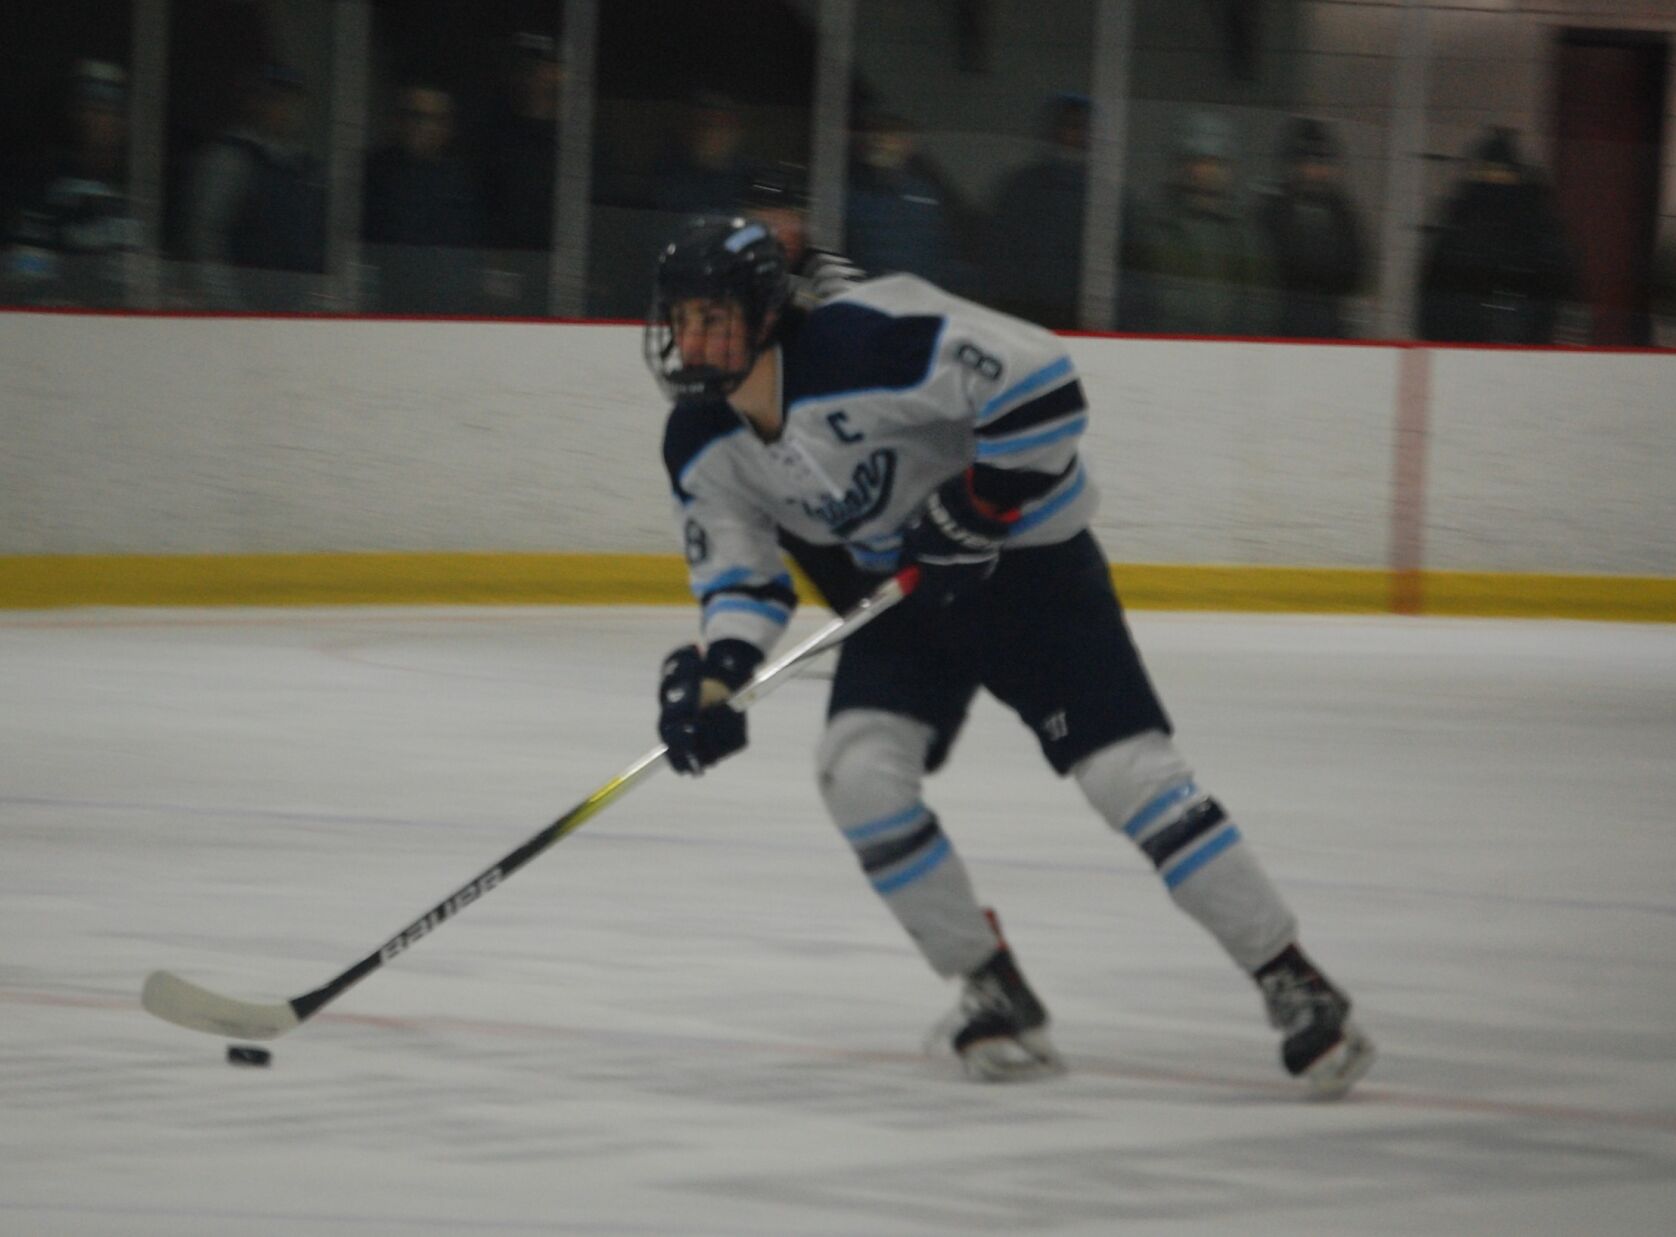 Medfield goalie shines as Triton hockey narrowly misses advancing in Div. 3 tournament